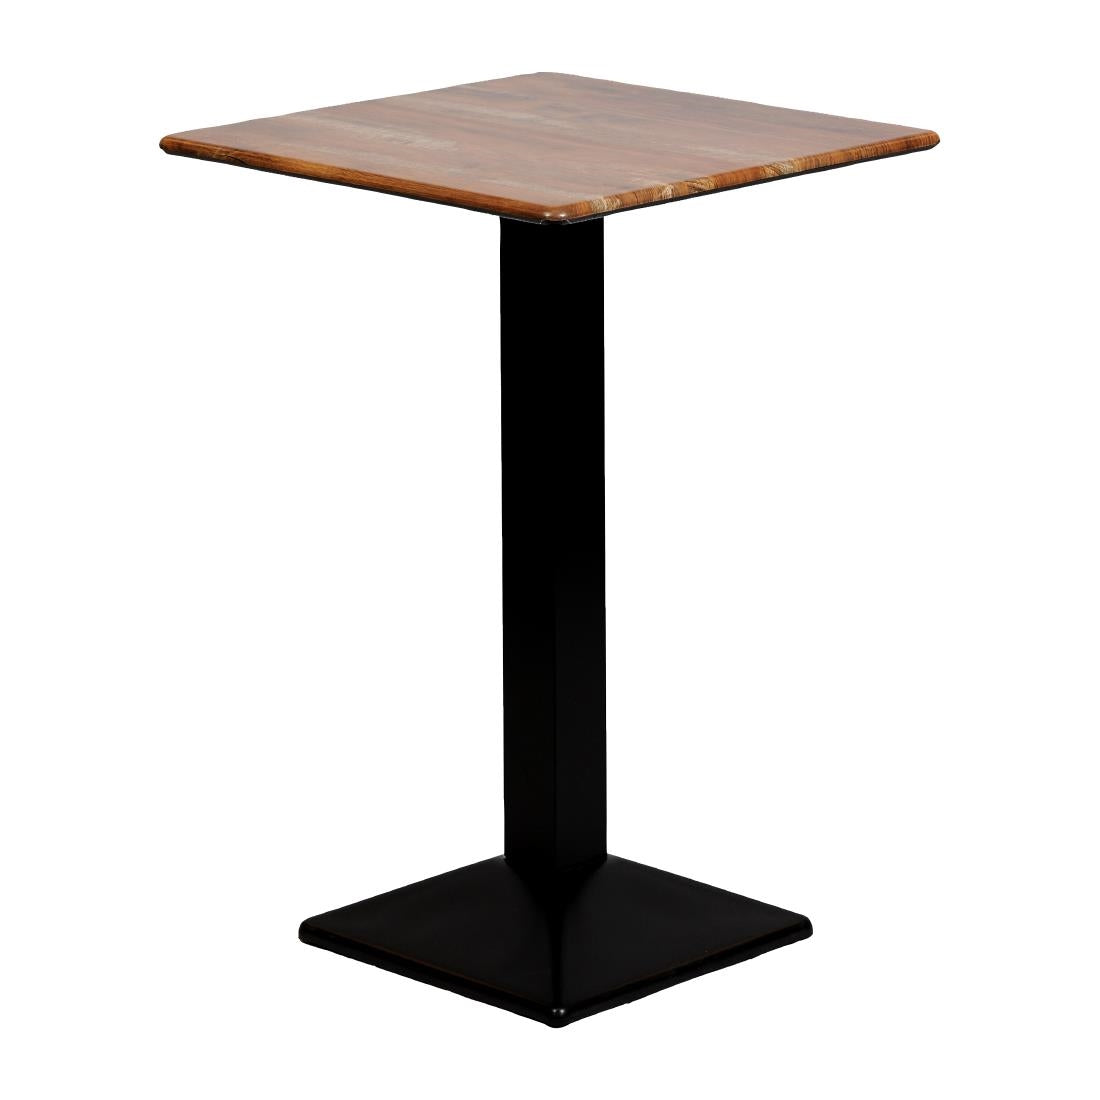 CZ828 Turin Metal Base Square Poseur Table with Laminate Top Planked Oak 600mm JD Catering Equipment Solutions Ltd